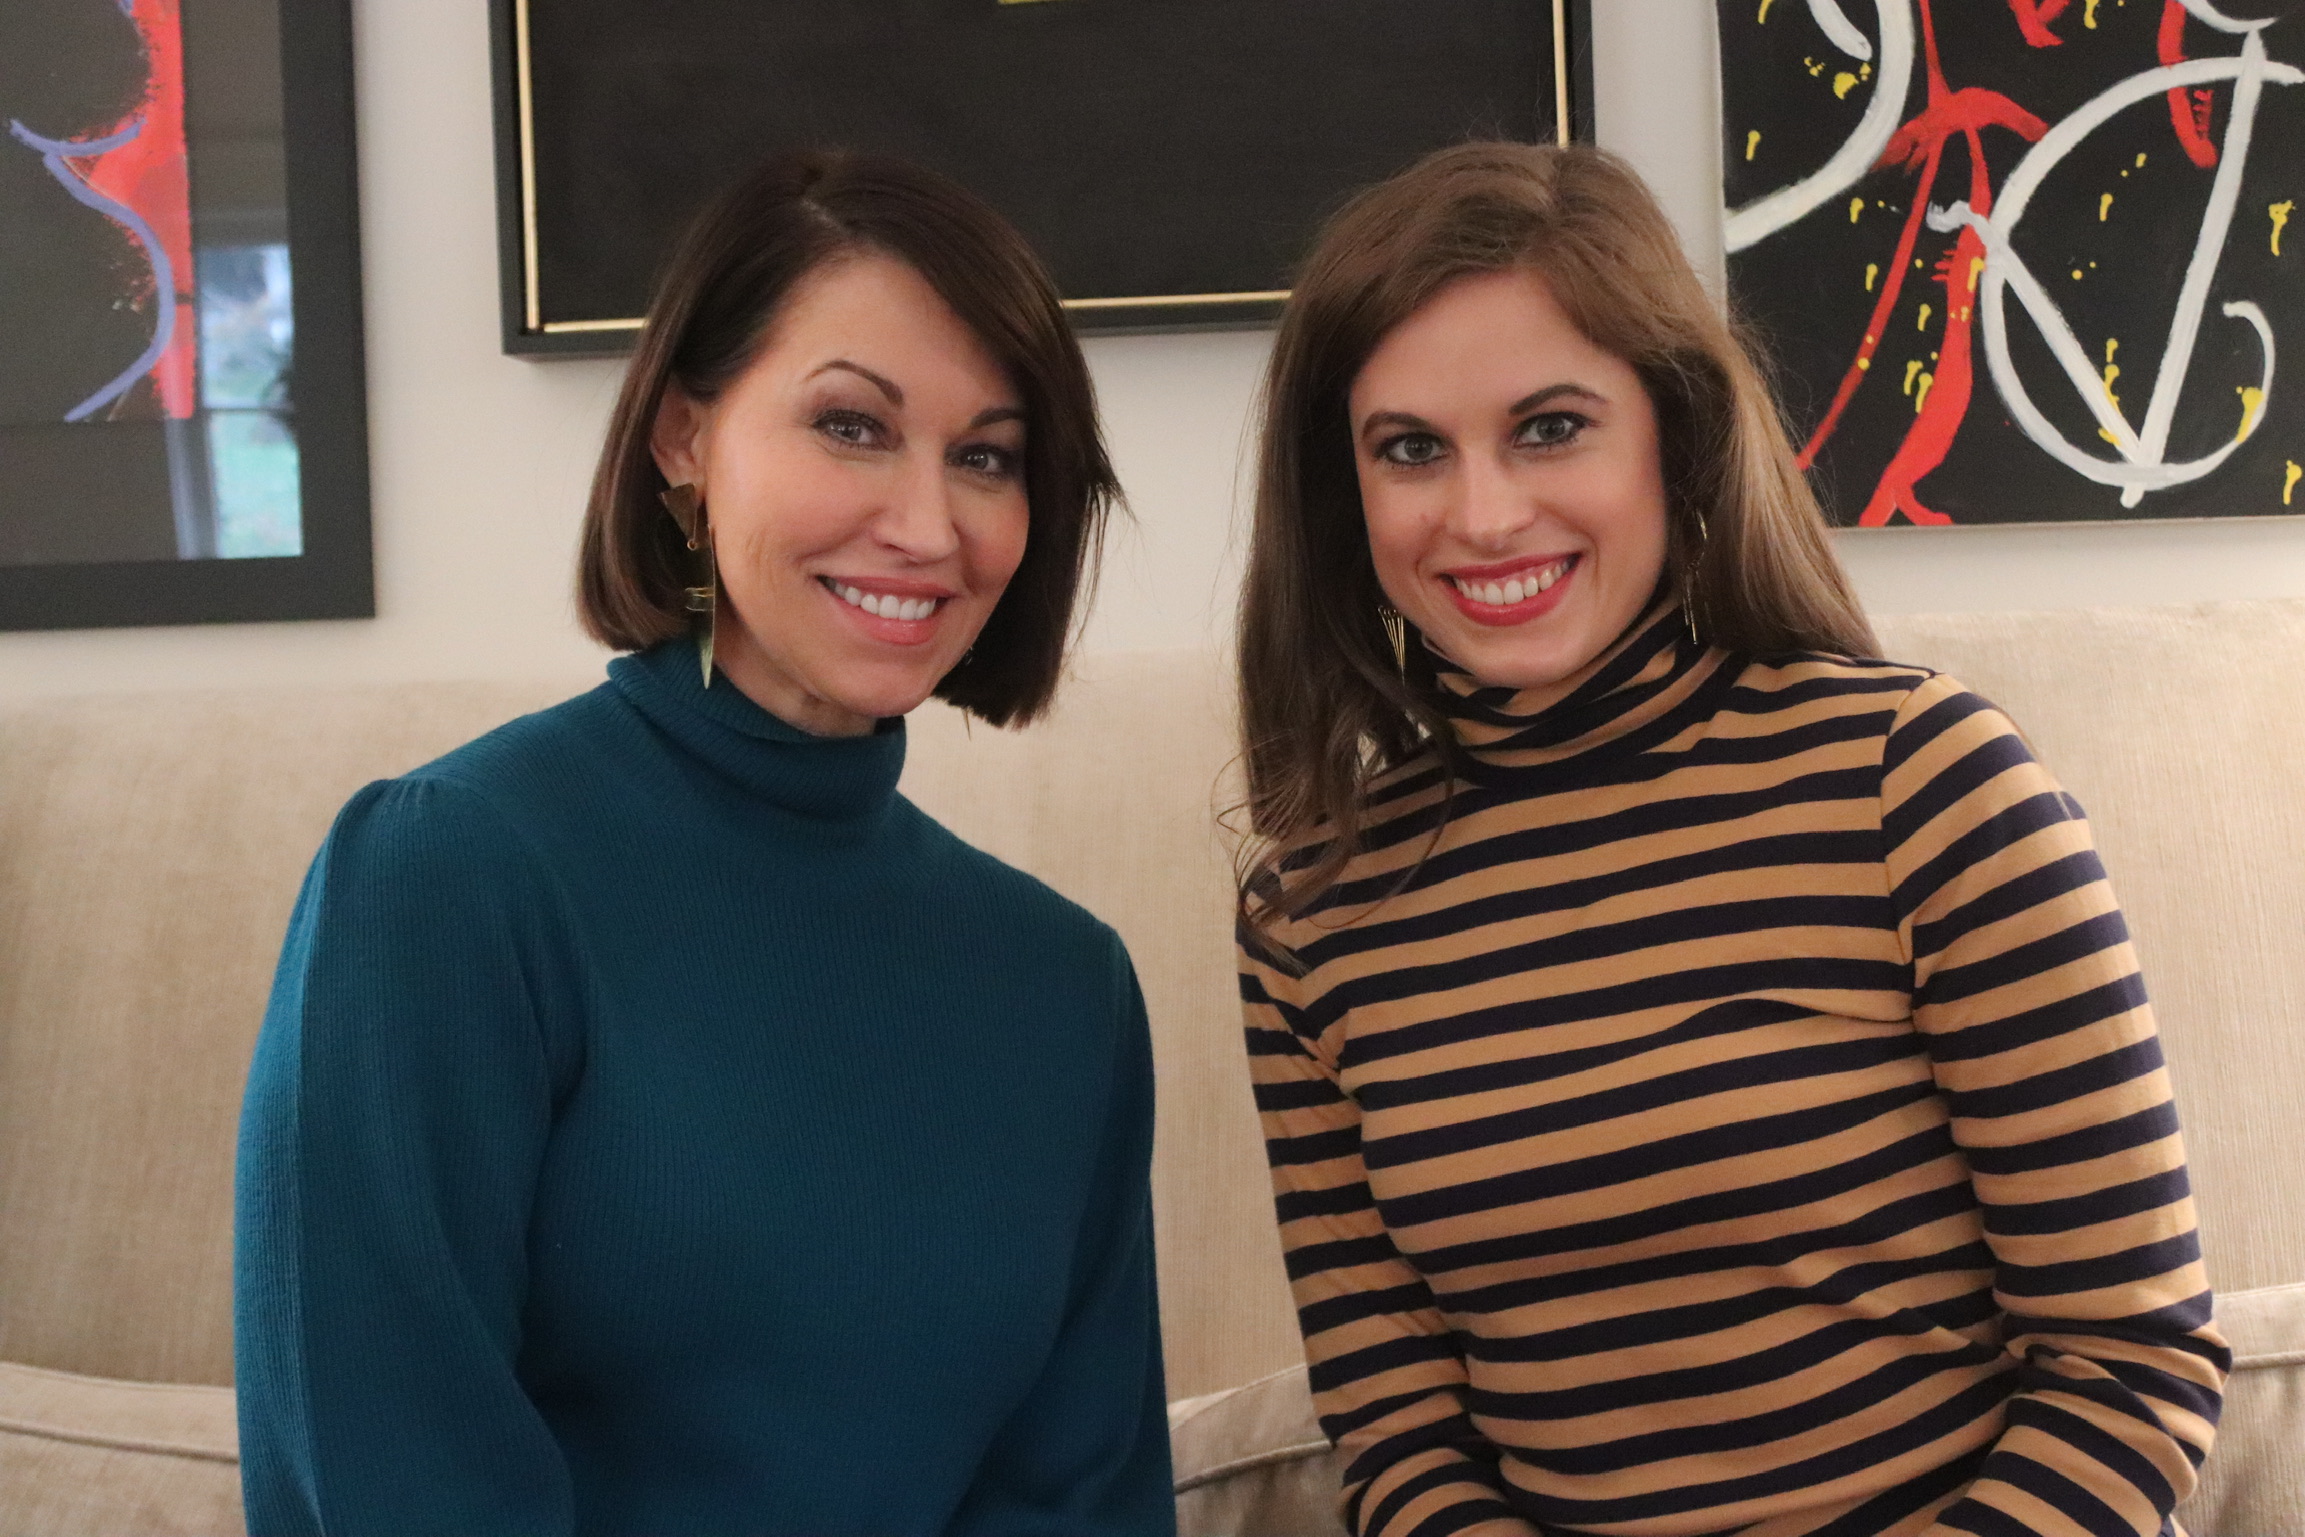 Two women sitting on a sofa: they both have brown hair. One is wearing a teal turtleneck sweater and the other is wearing a black & gold stripe turtleneck